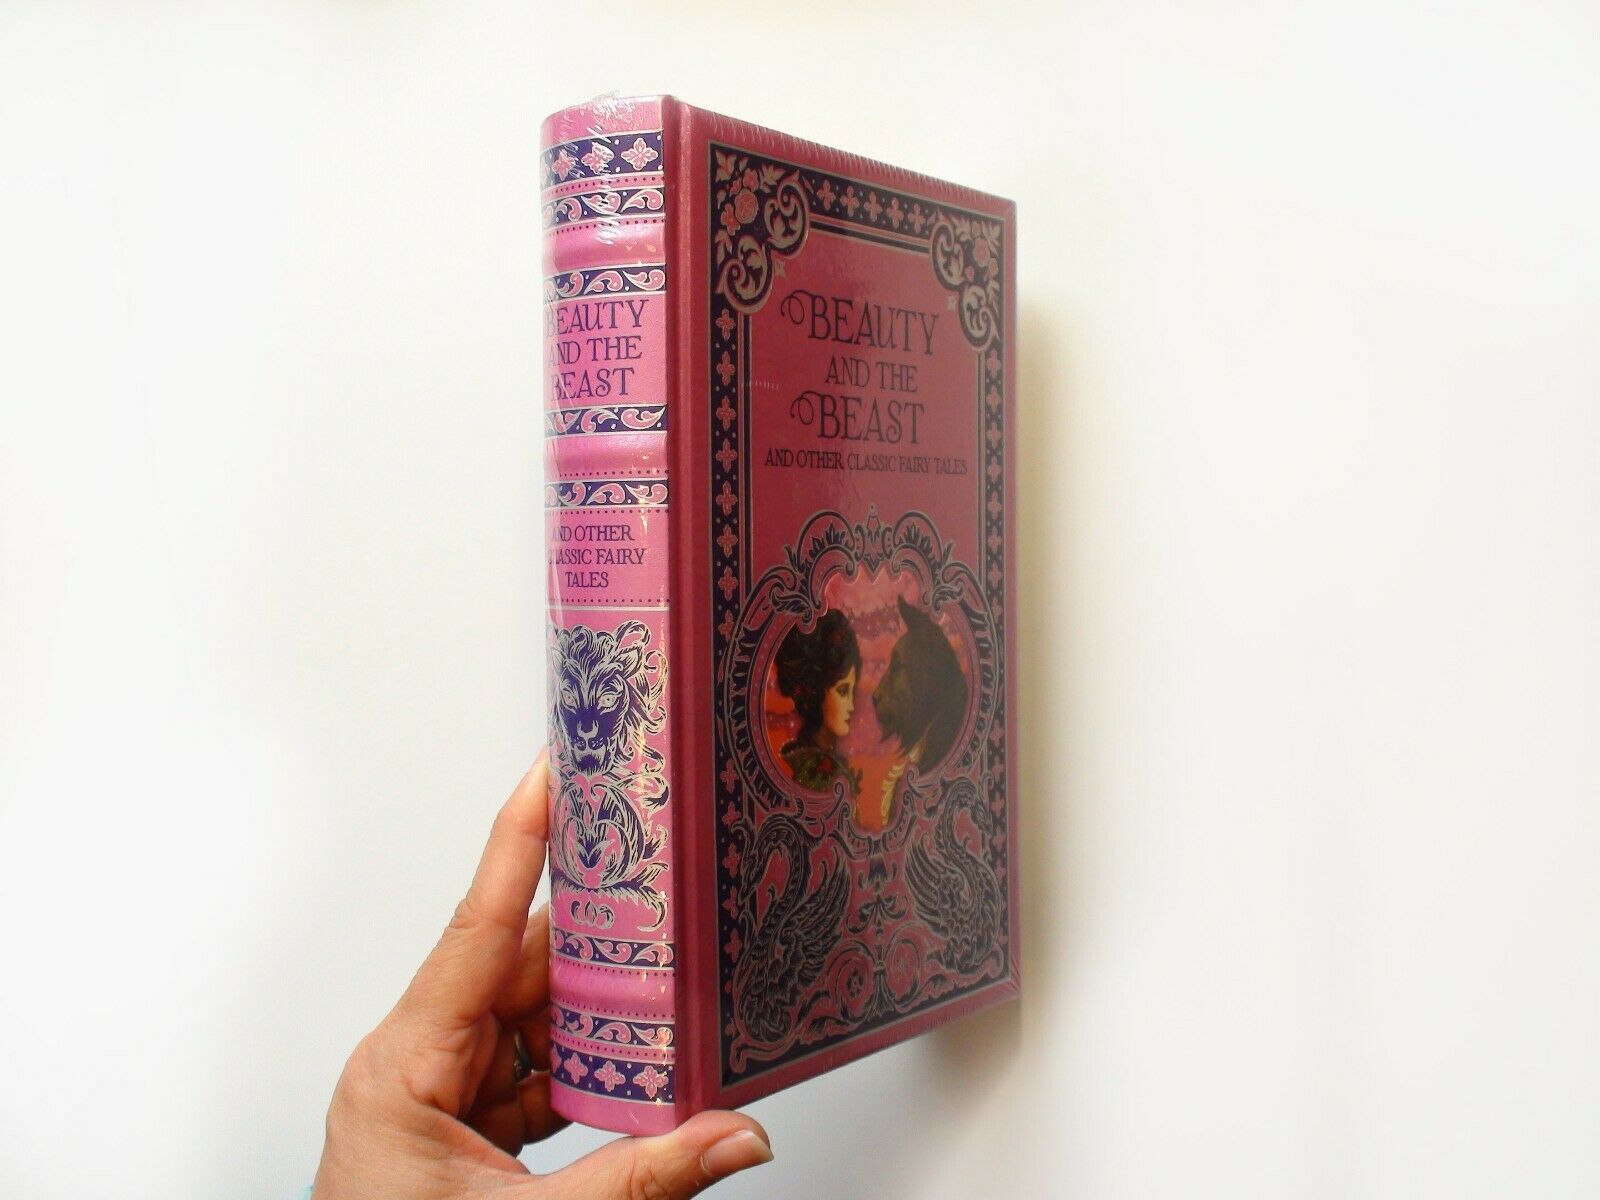 Beauty and the Beast and Other Classic Fairy Tales, 2016, Barnes & Noble Edition